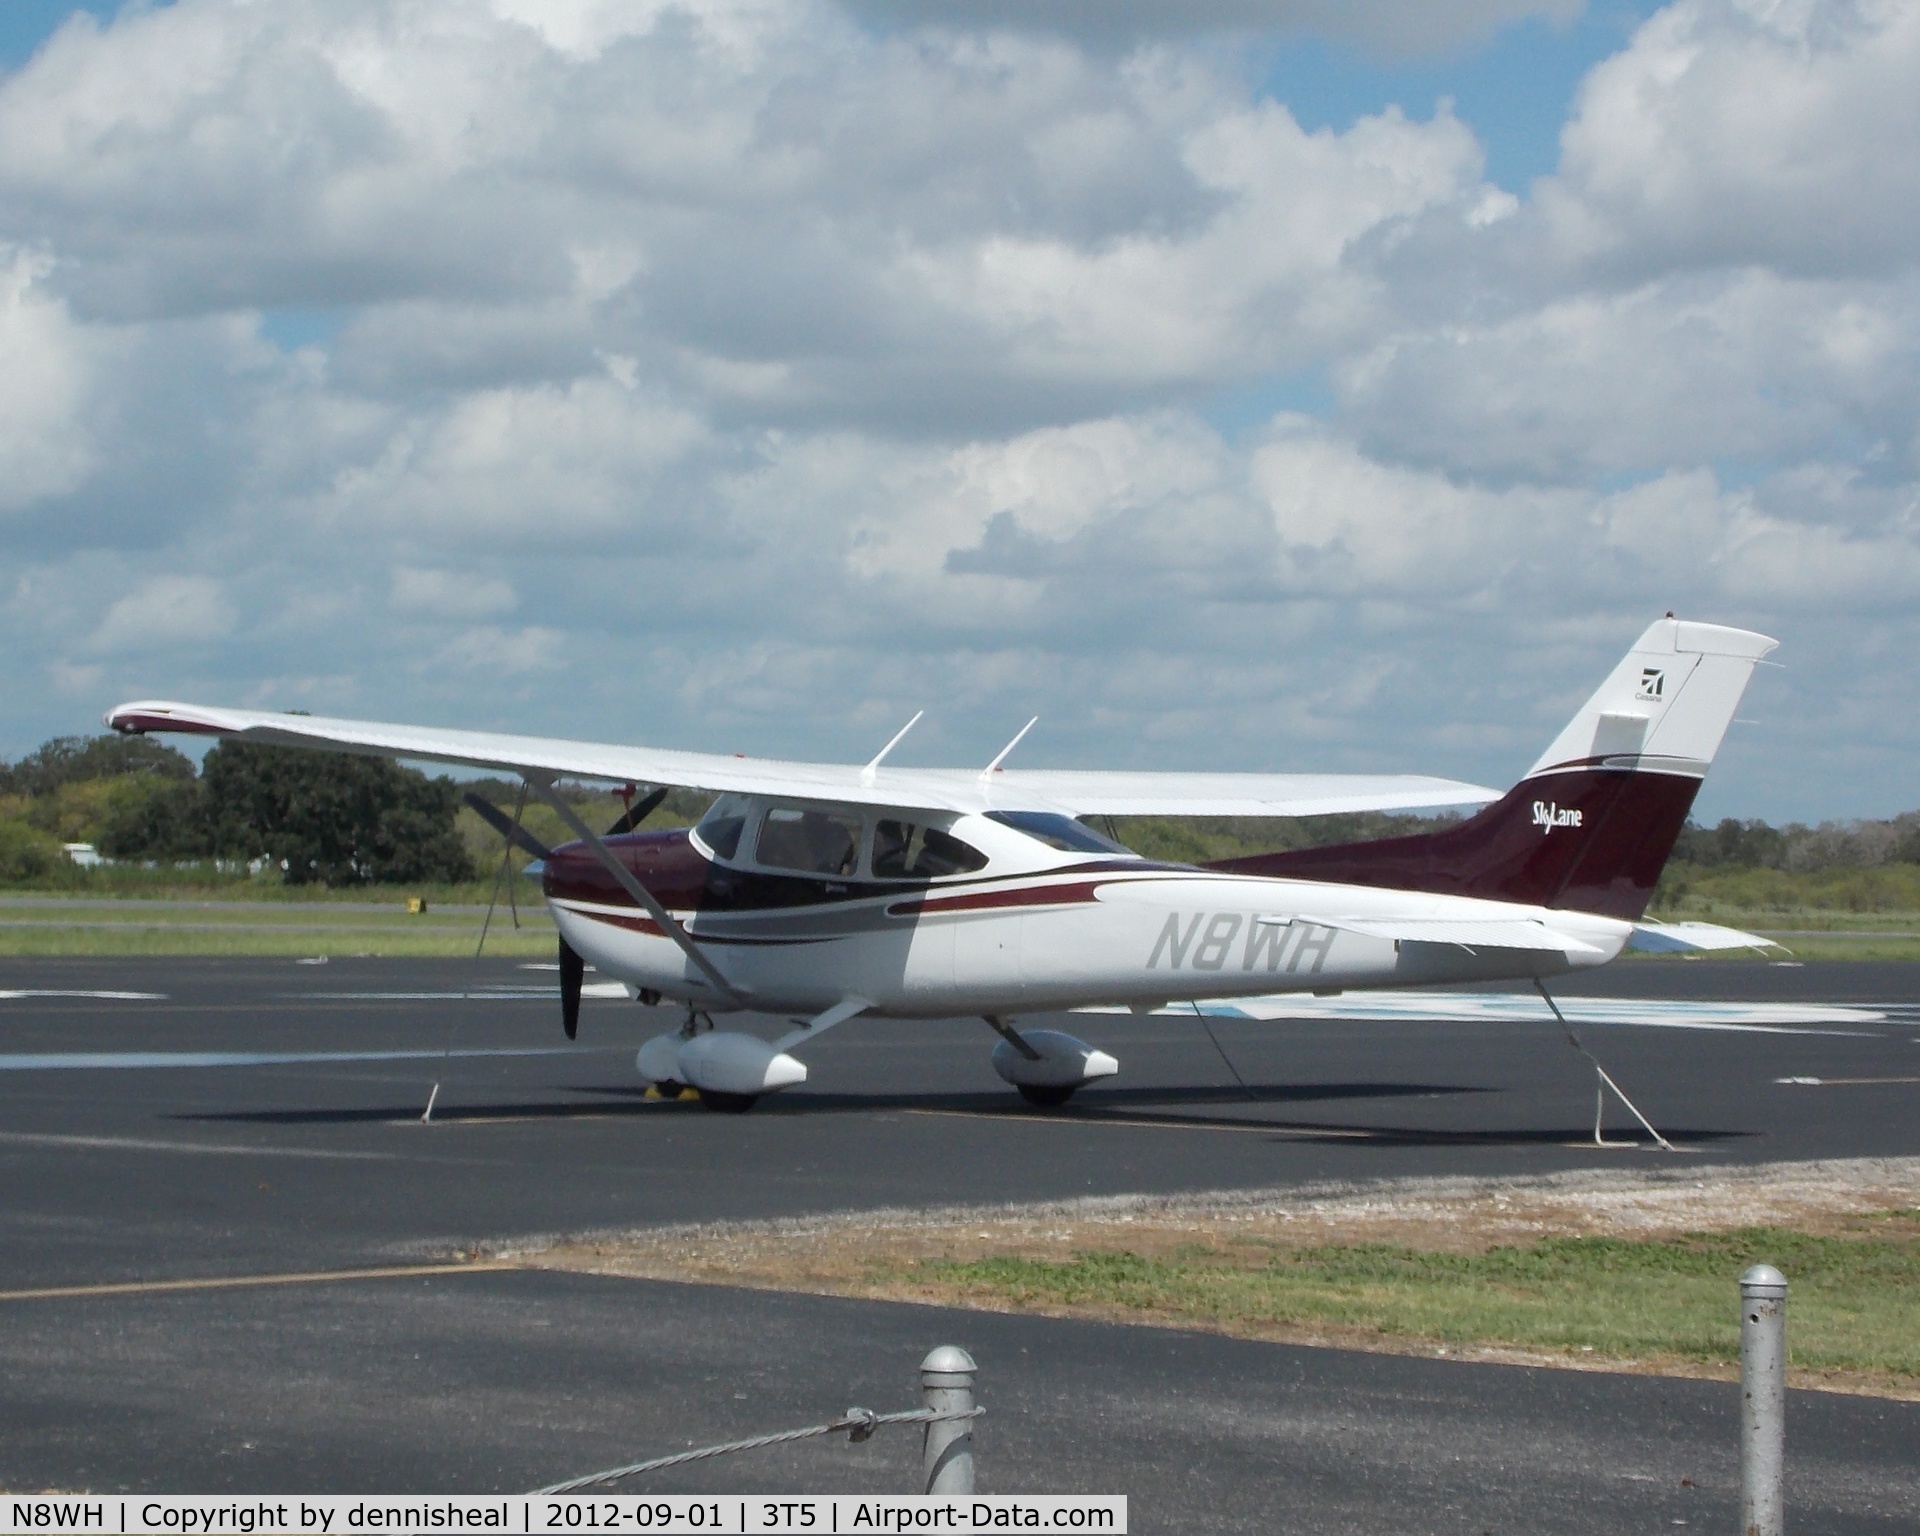 N8WH, 2004 Cessna 182T Skylane C/N 18281499, N8WH SPOTTED AT AIRPORT AND NOT LISTED ON THE PROGRAM